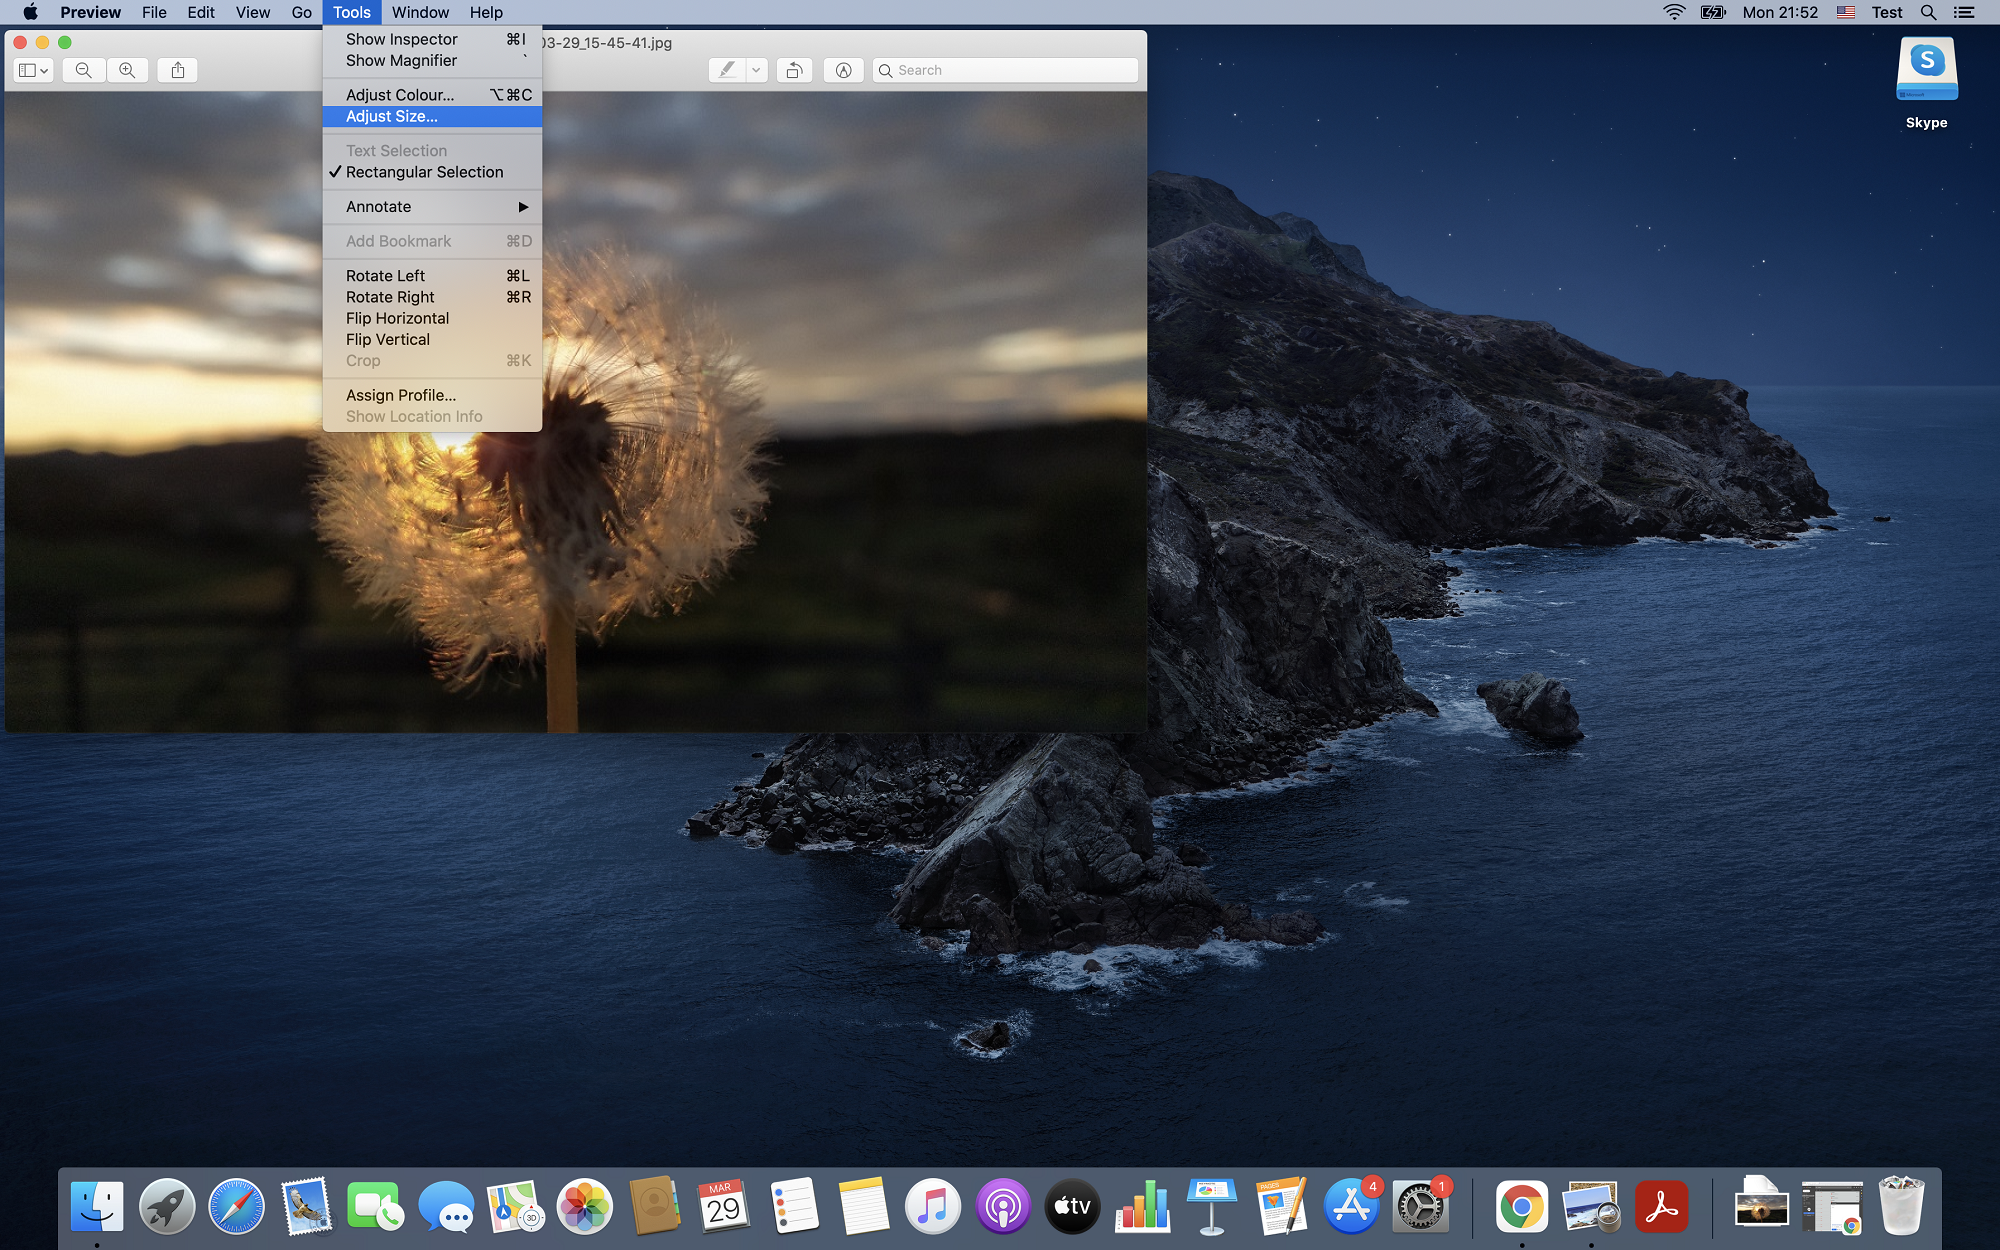 Convert low resolution image to high resolution on Mac